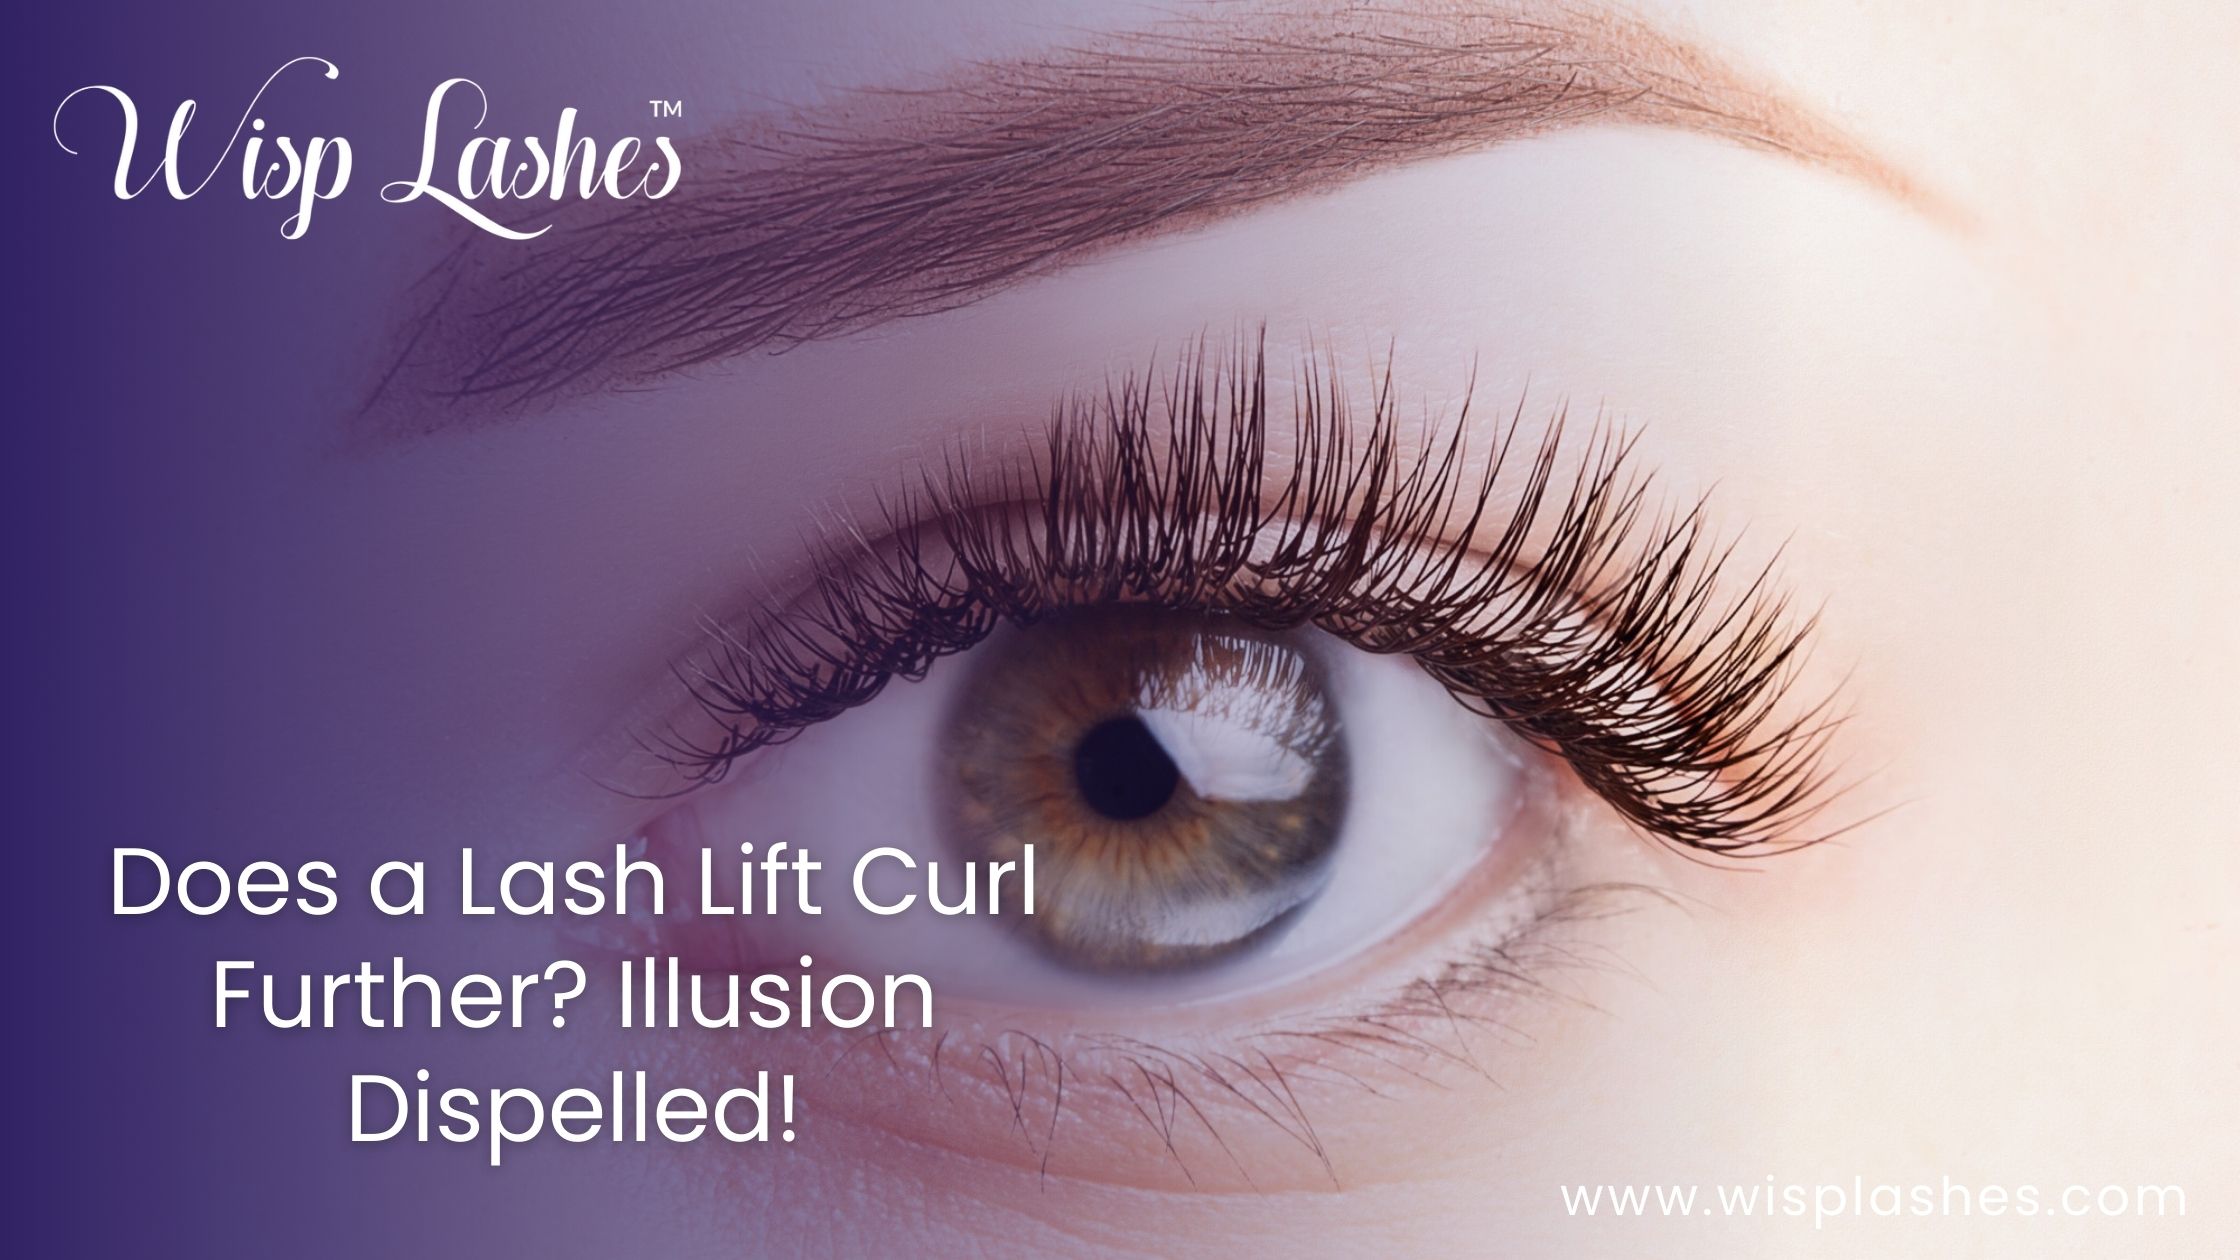 Does a Lash Lift Curl Further? Illusion Dispelled!